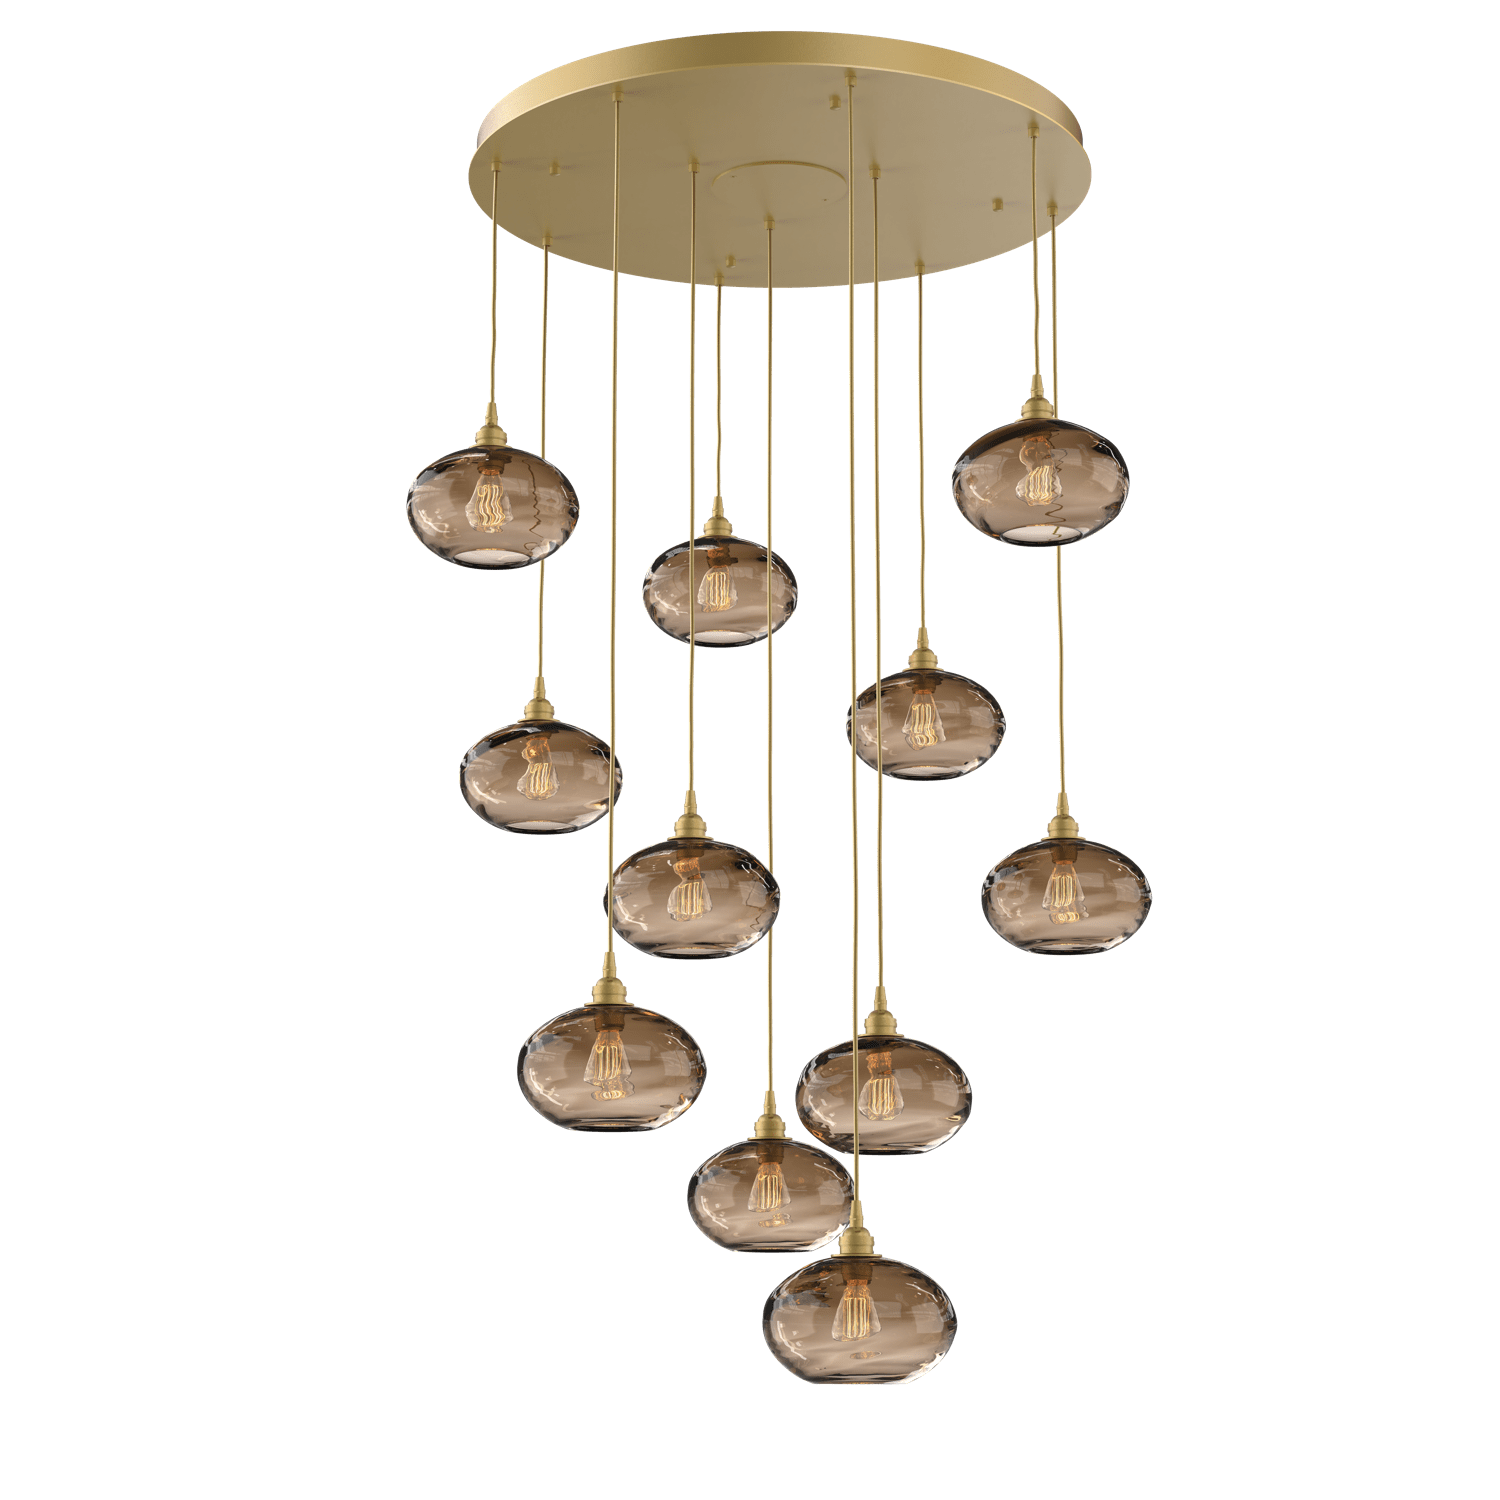 CHB0036-11-GB-OB-Hammerton-Studio-Optic-Blown-Glass-Coppa-11-light-round-pendant-chandelier-with-gilded-brass-finish-and-optic-bronze-blown-glass-shades-and-incandescent-lamping